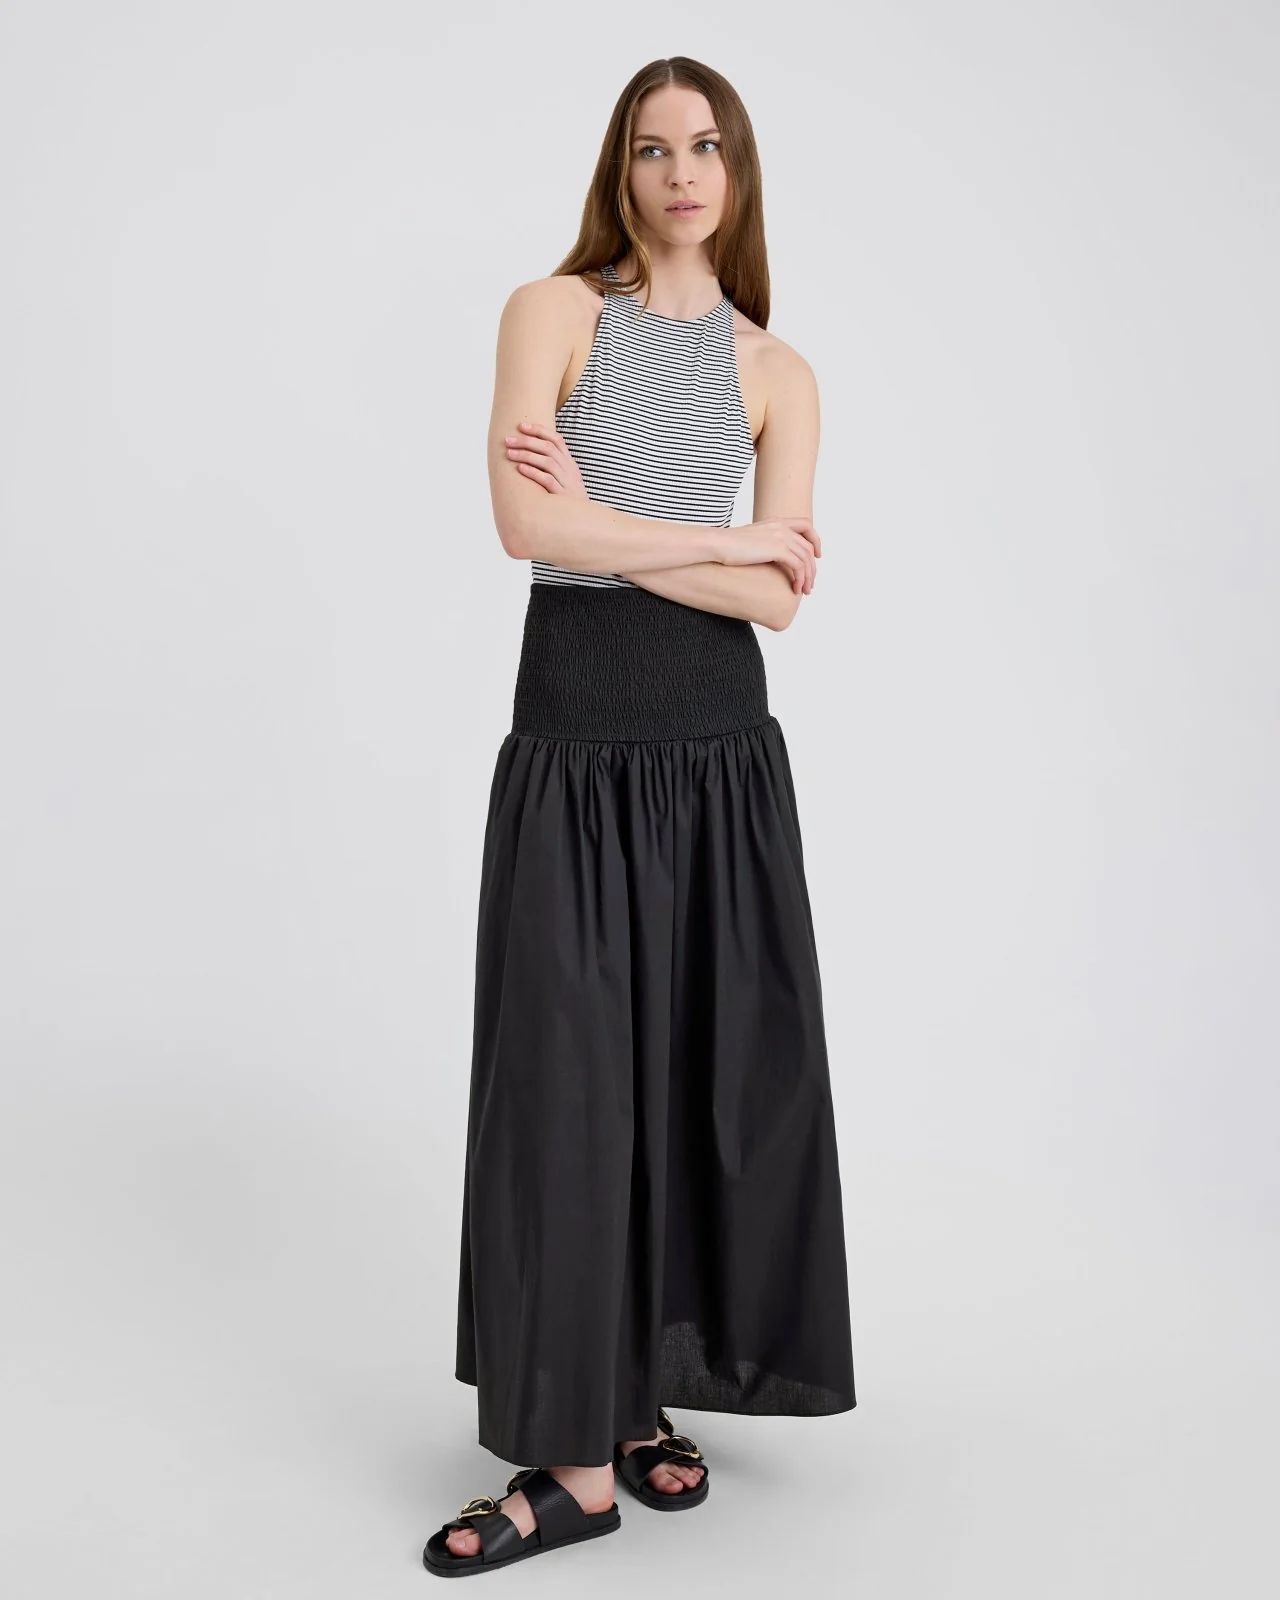 The Zaria Skirt in Blackout | Solid & Striped